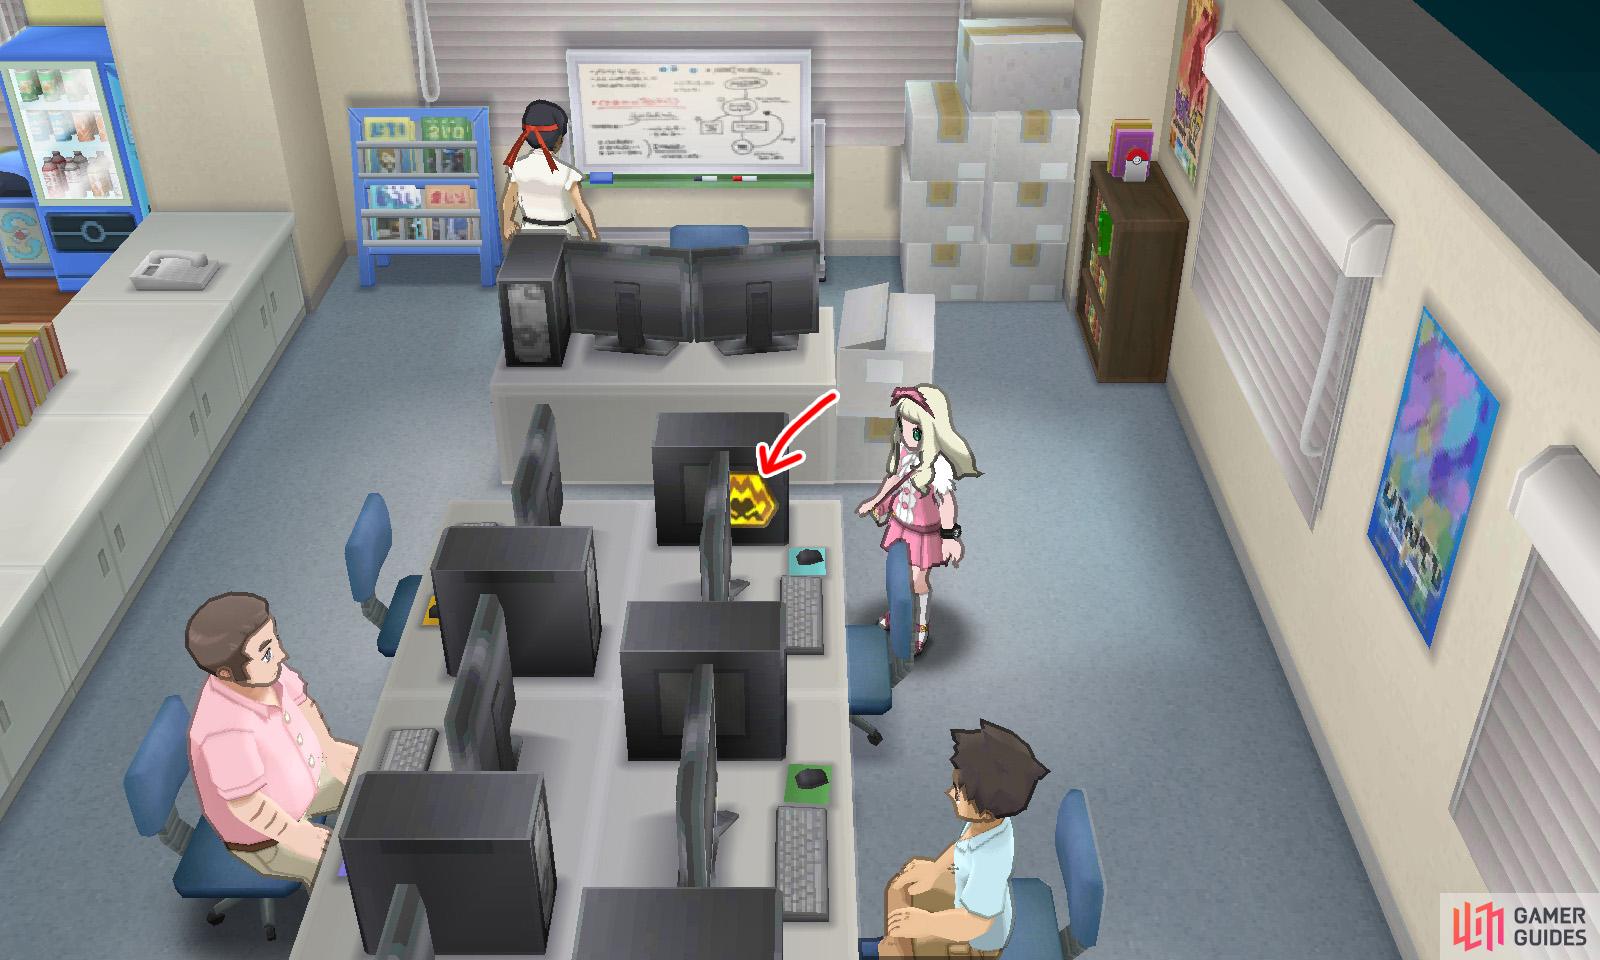 030: Office building to east of Surf Association. On a computer monitor in the Game Freak office.